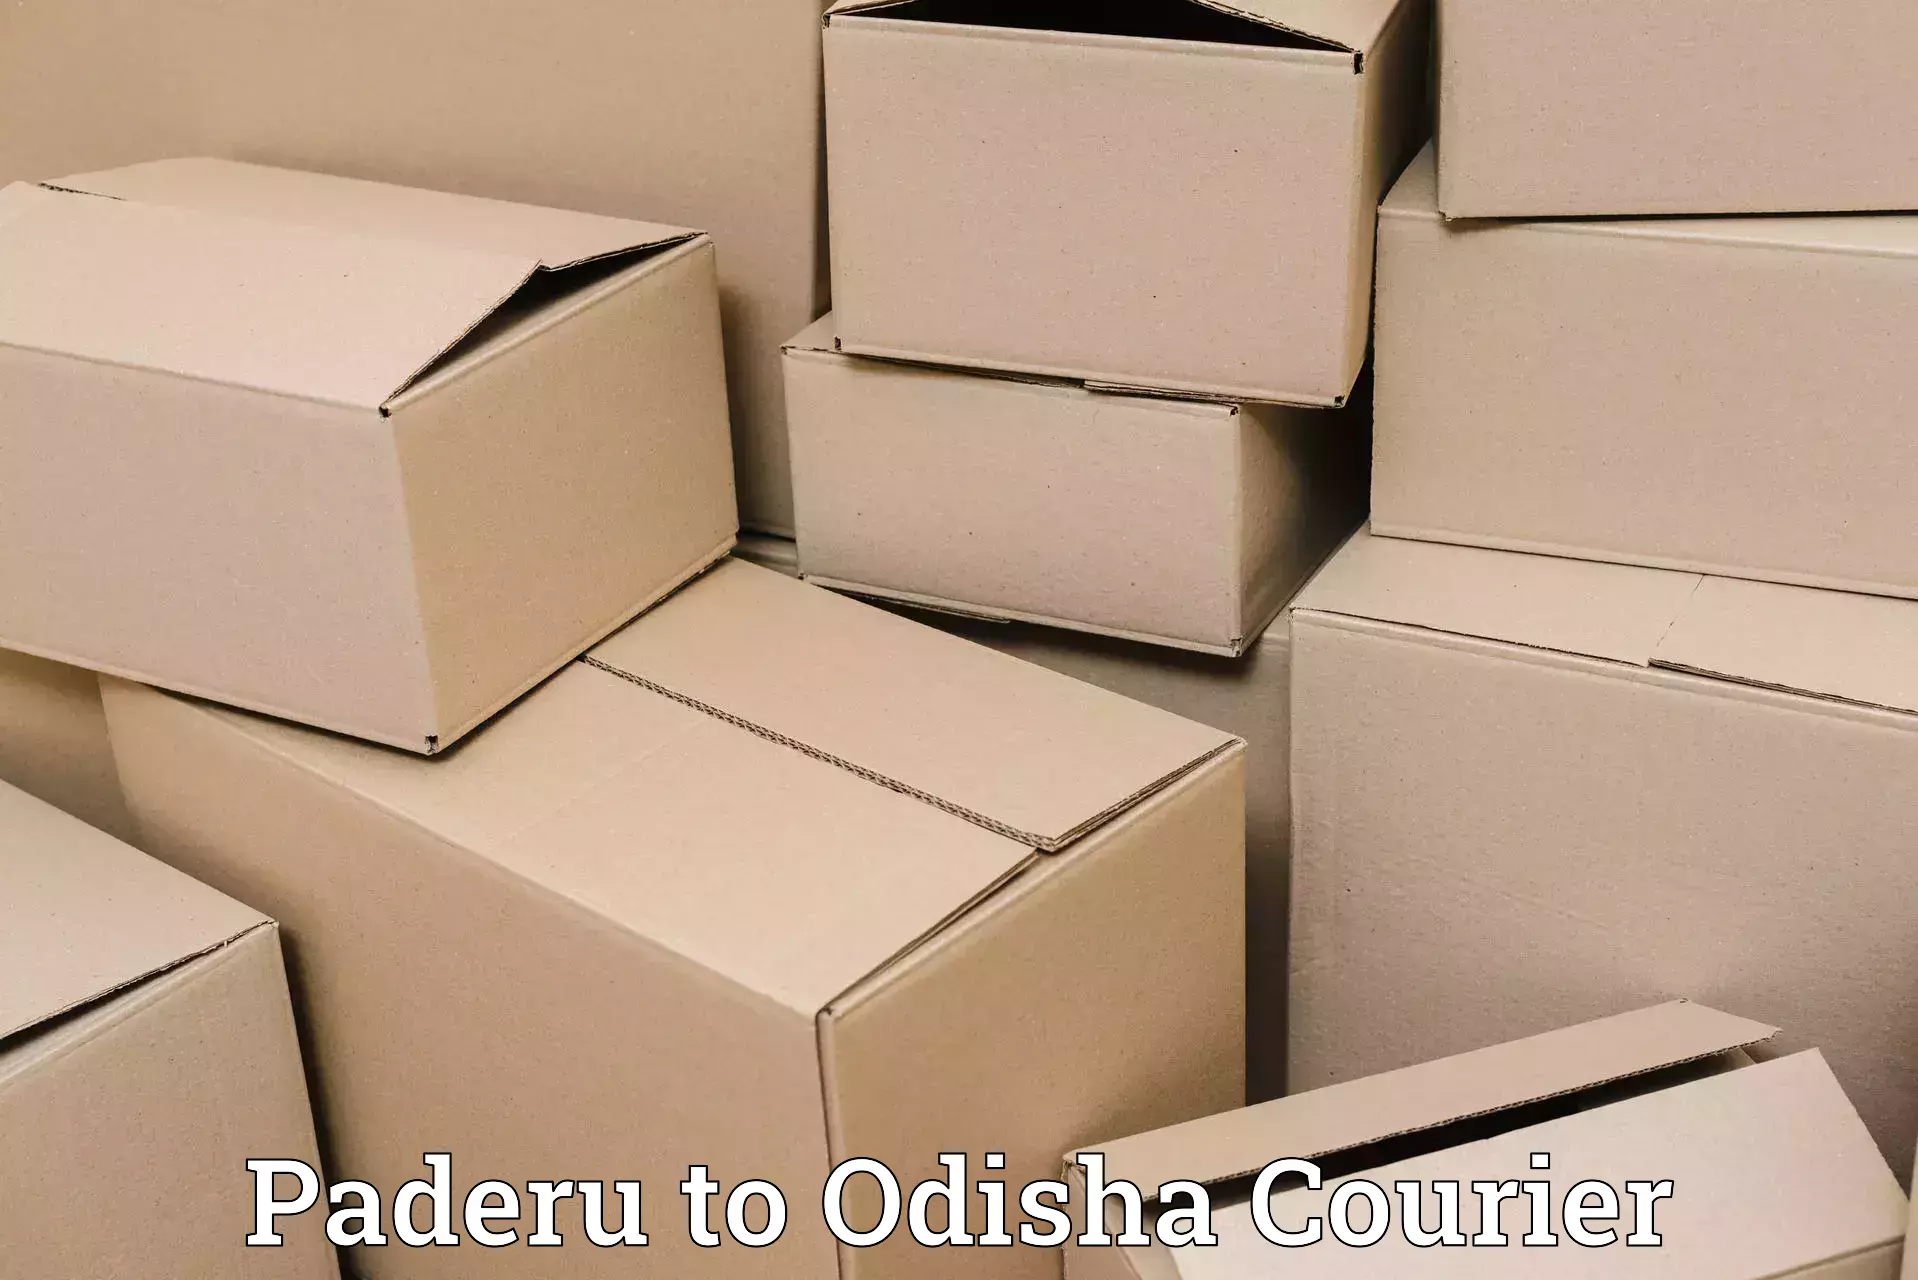 High-quality delivery services in Paderu to Asika